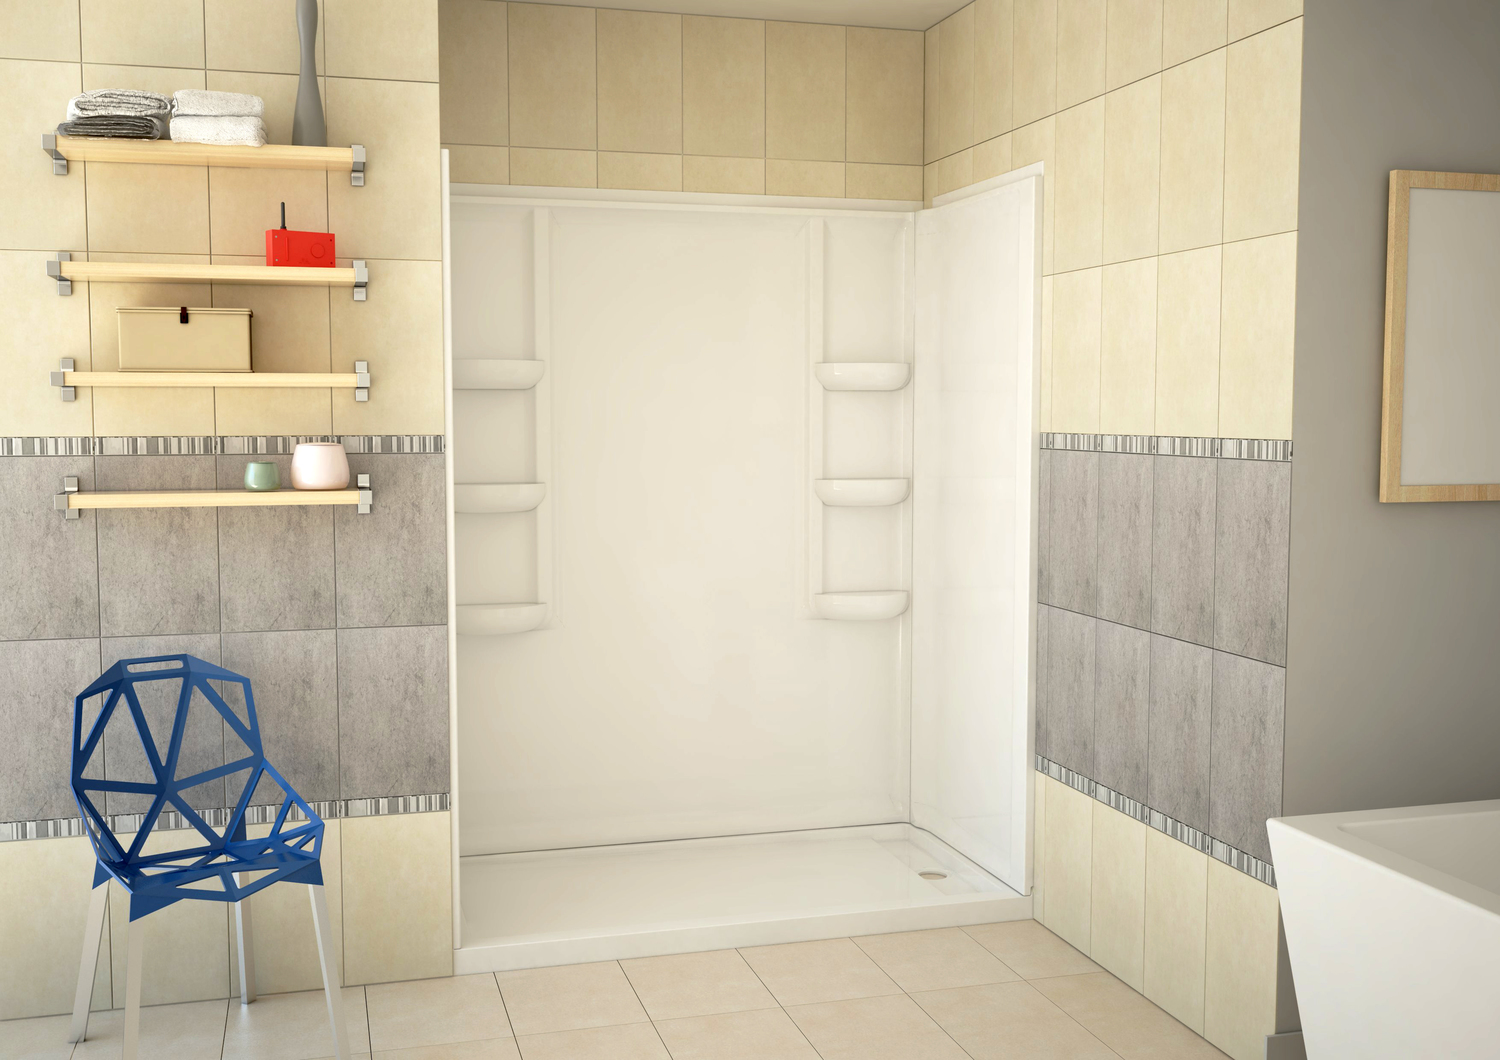 direct to stud shower walls Anzzi SHOWER - Shower Walls - Alcove White